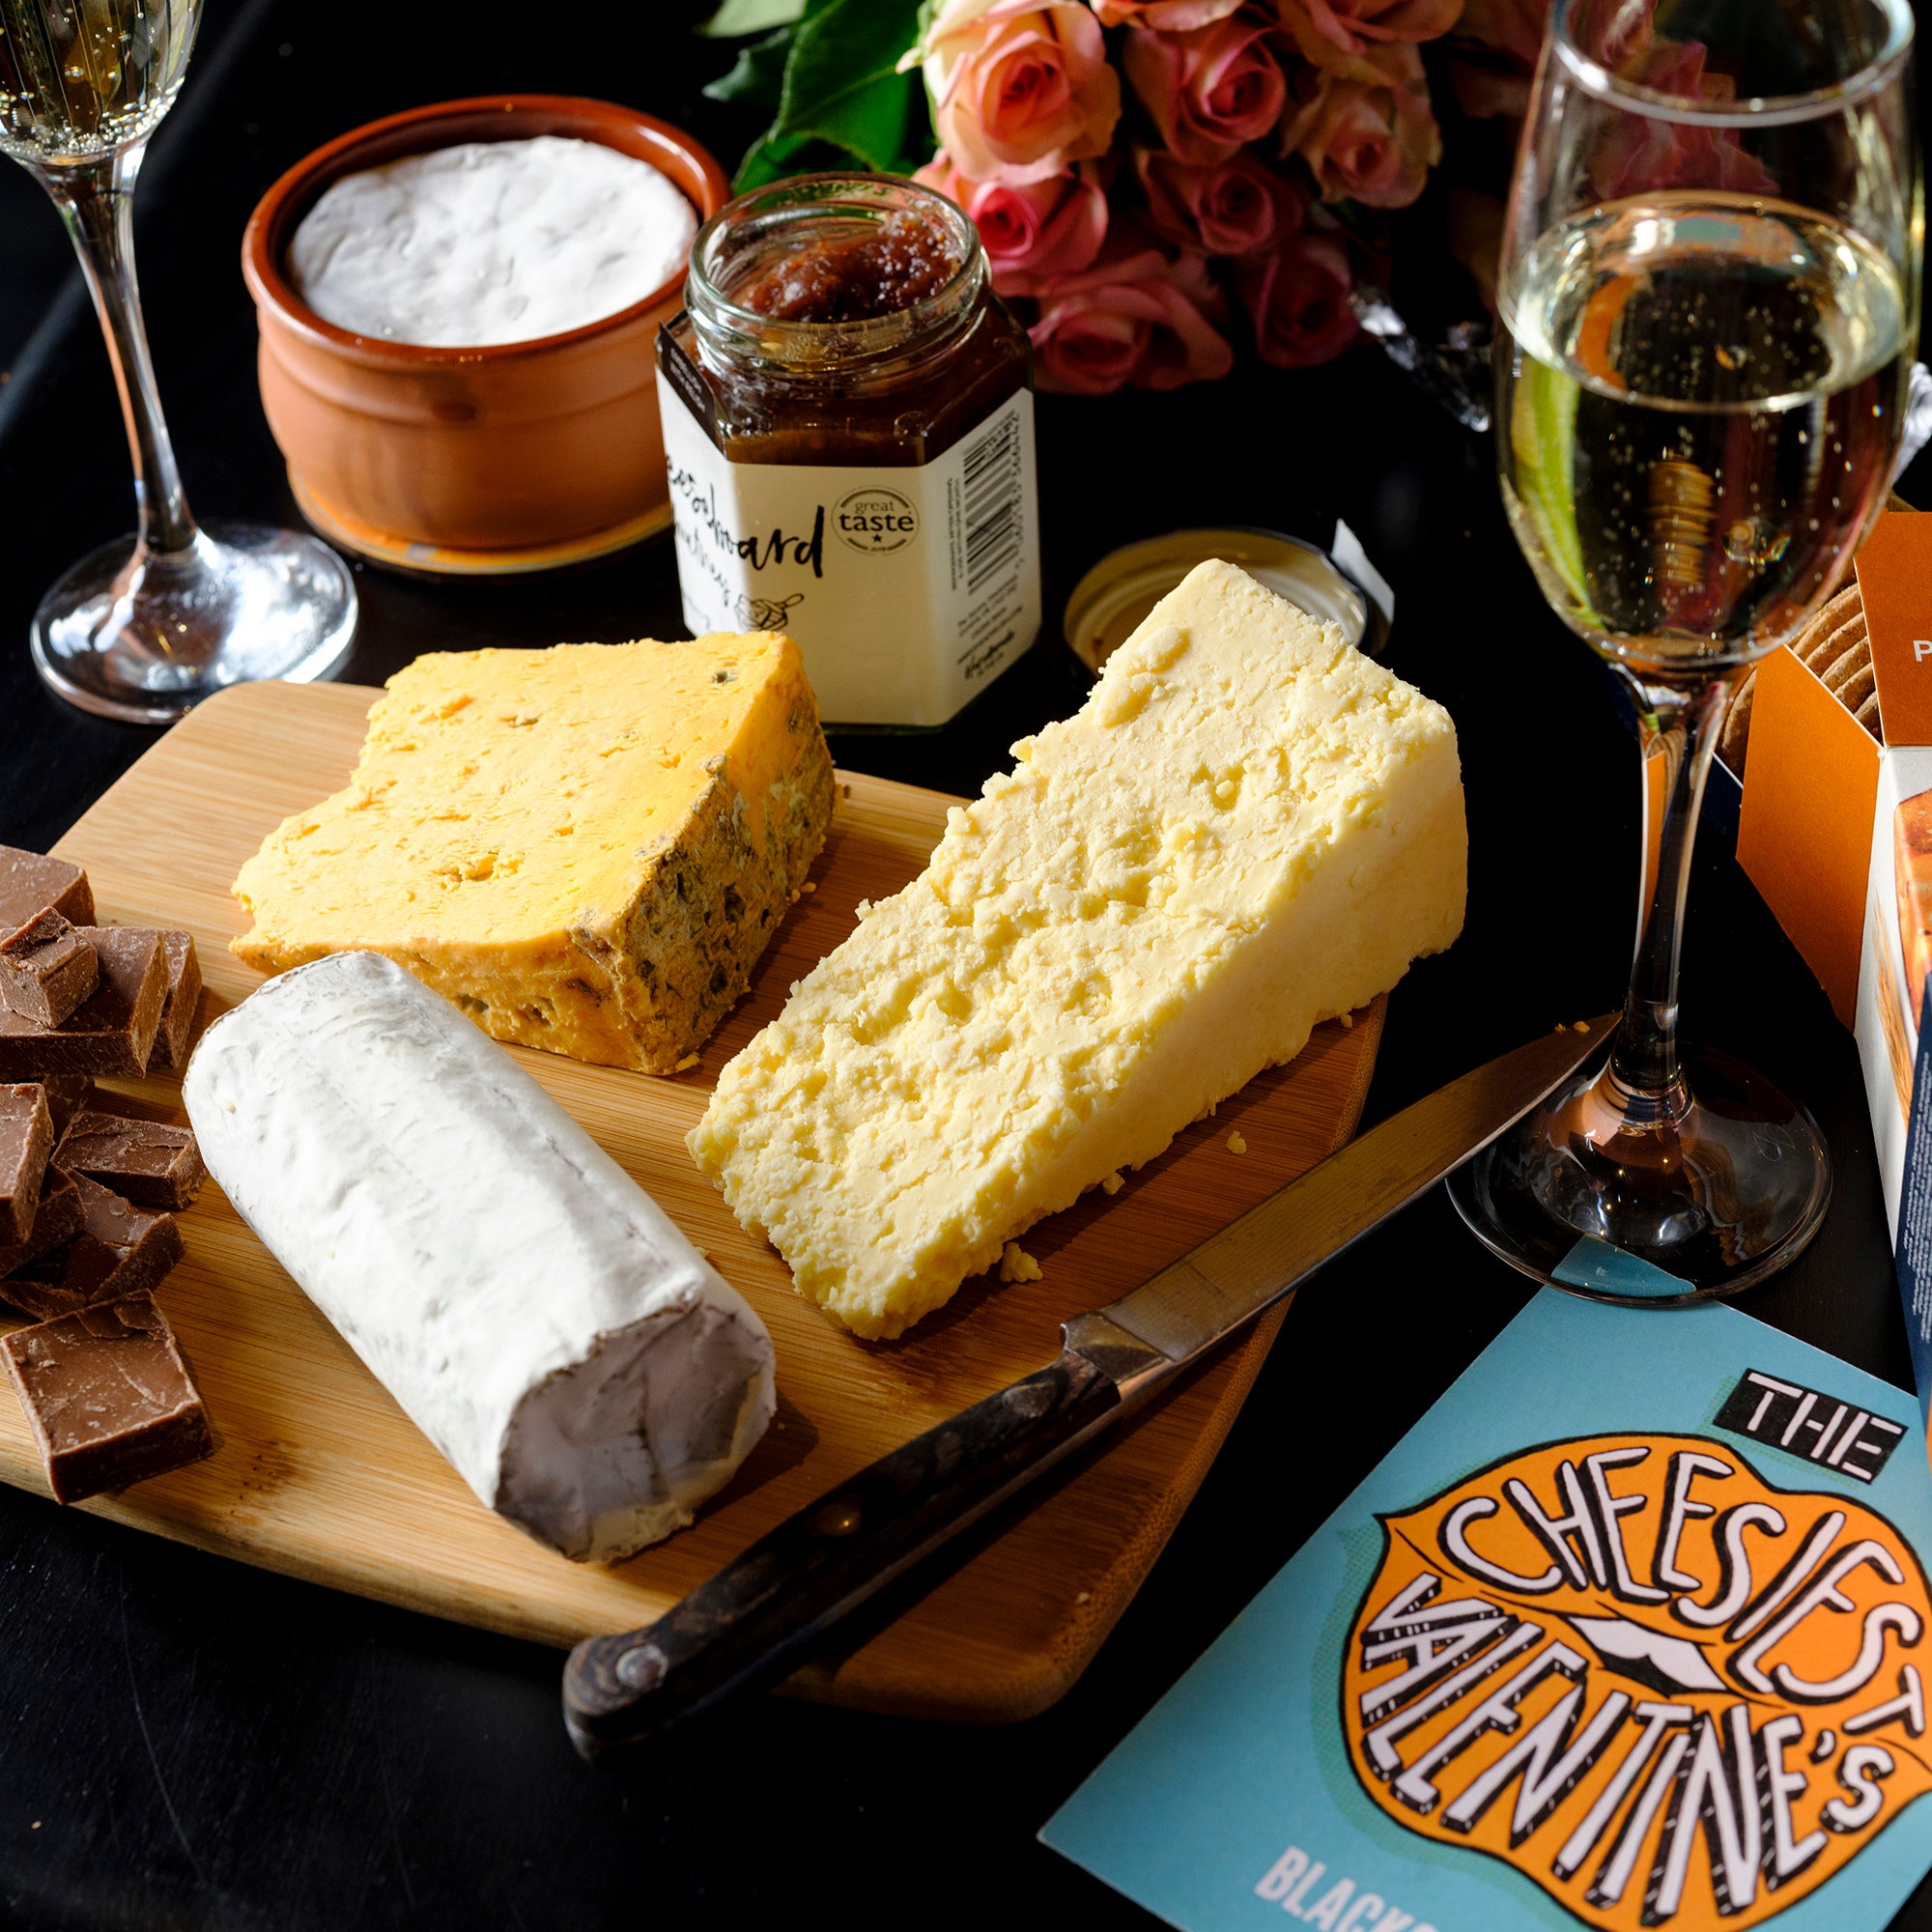 The contains of our Ultimate Valentine's Day Cheese Hamper, with three cheeses on a cheeseboard with chutney, crackers, Valentines card, baking brie and champagne.